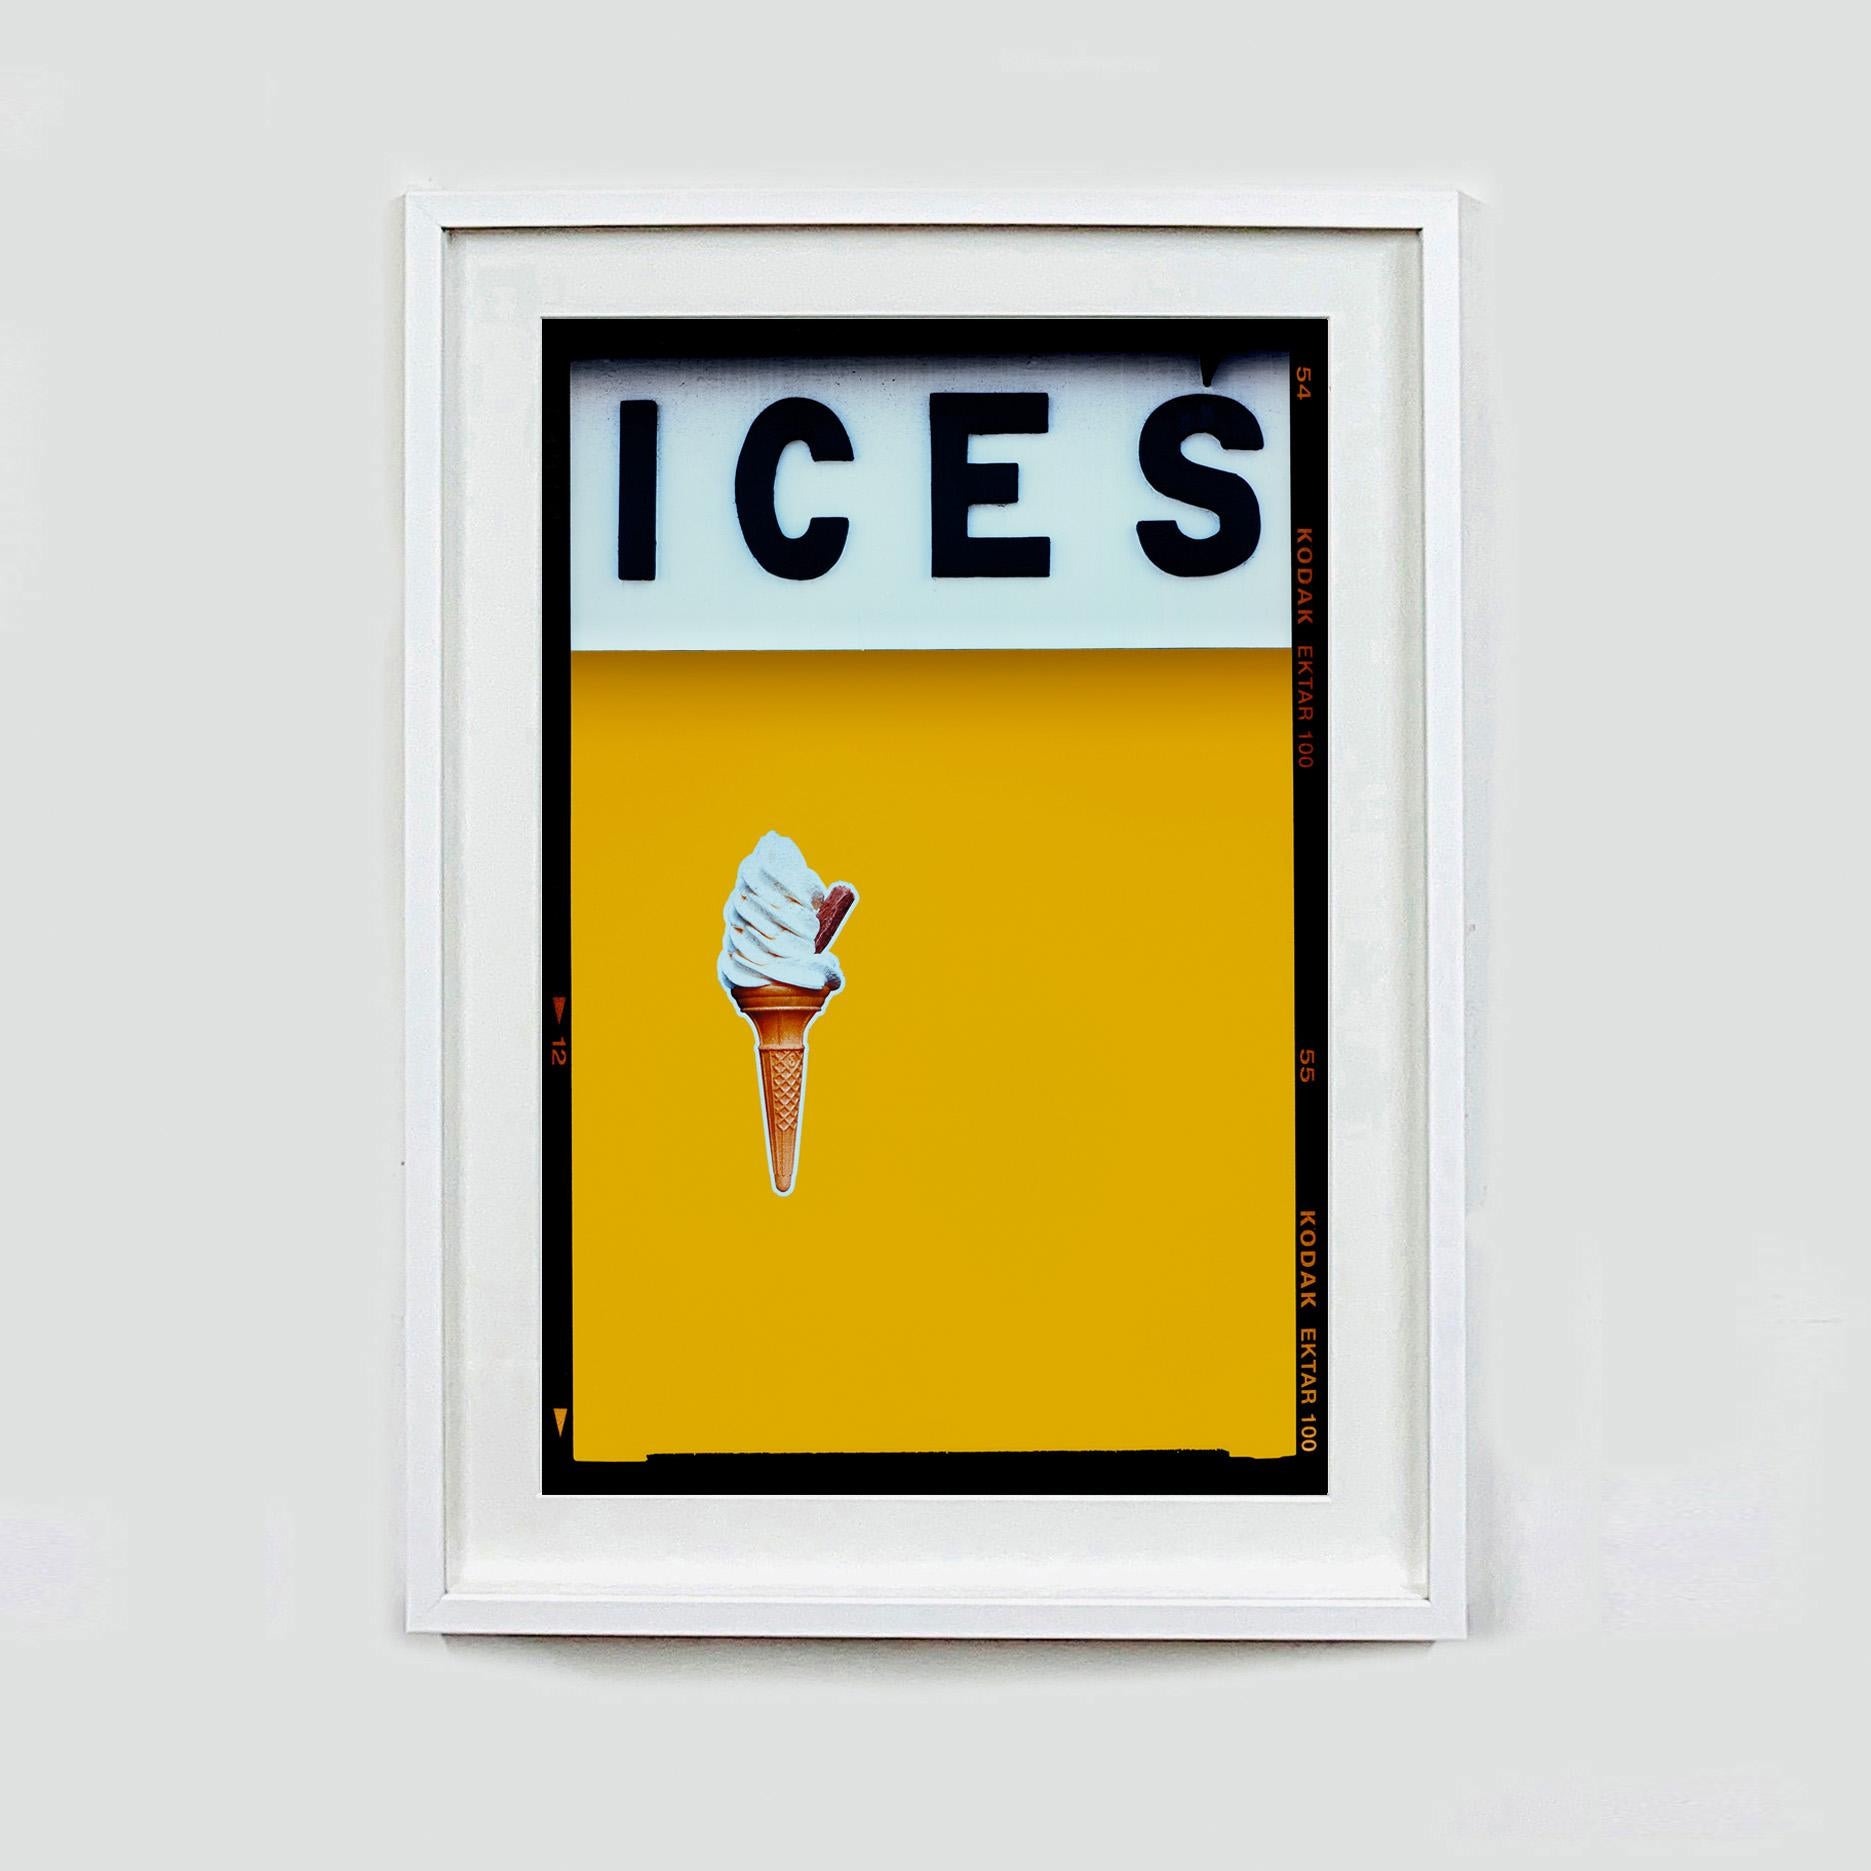 Ices (Mustard Yellow), Bexhill-on-Sea - British seaside color photography - Pop Art Print by Richard Heeps